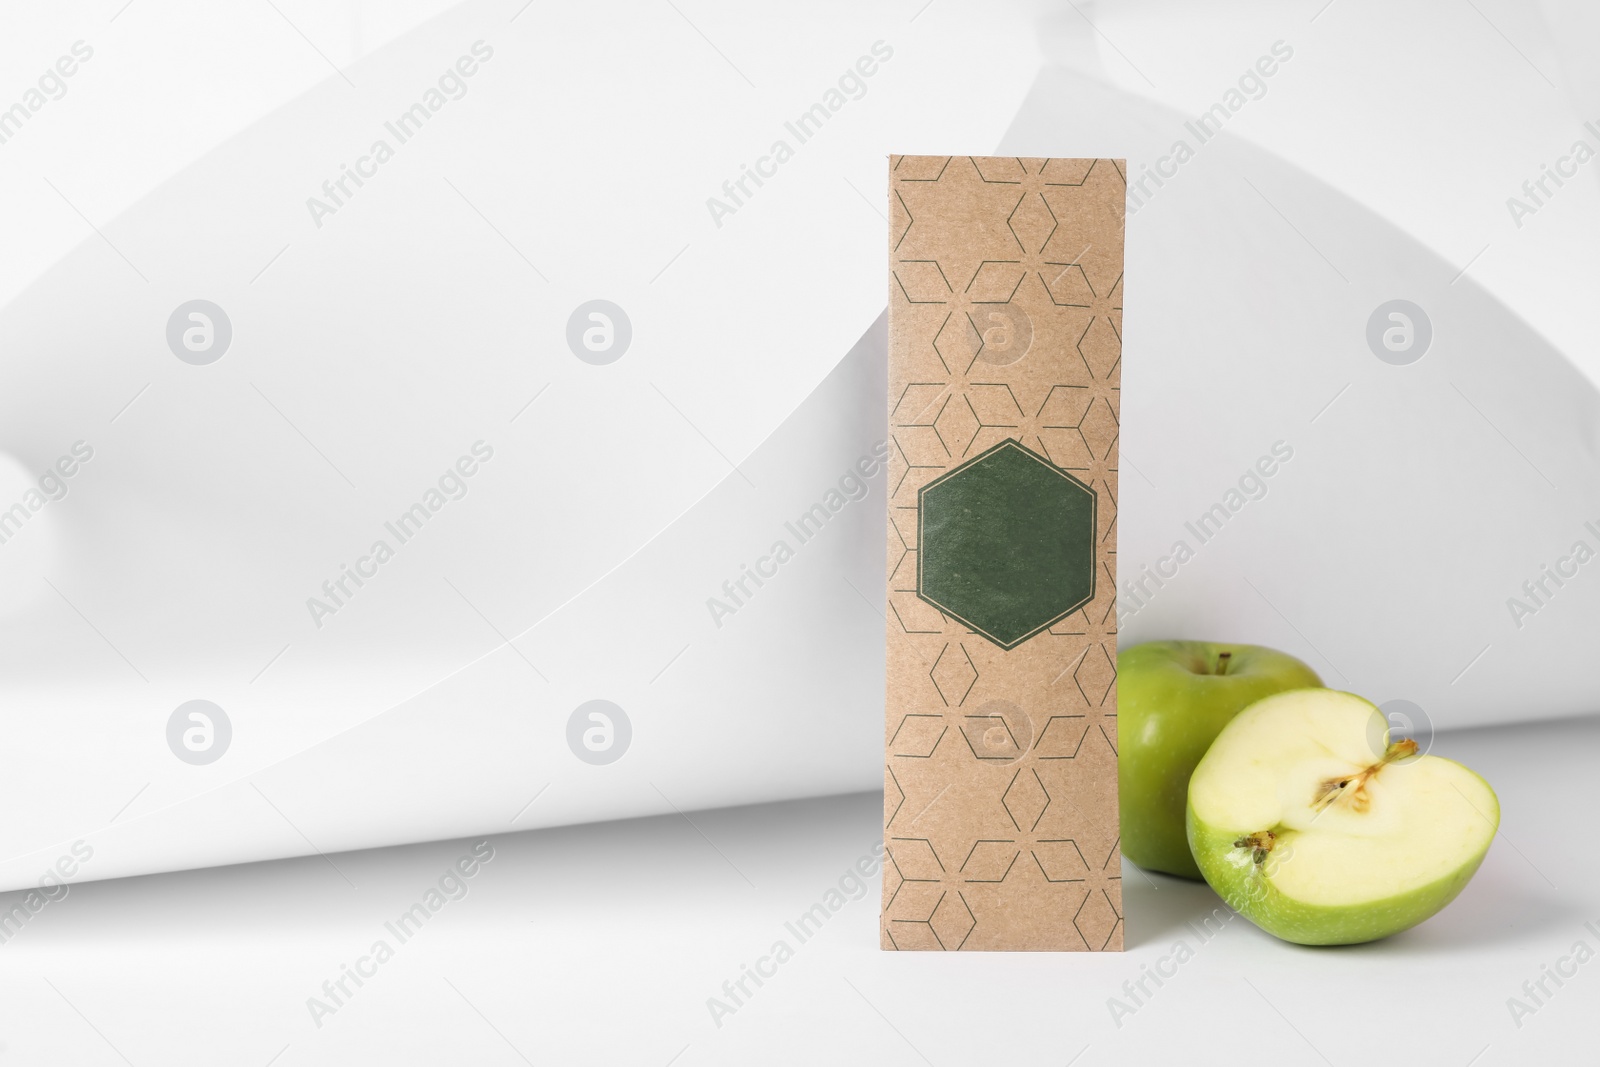 Photo of Scented sachet and apples on white background